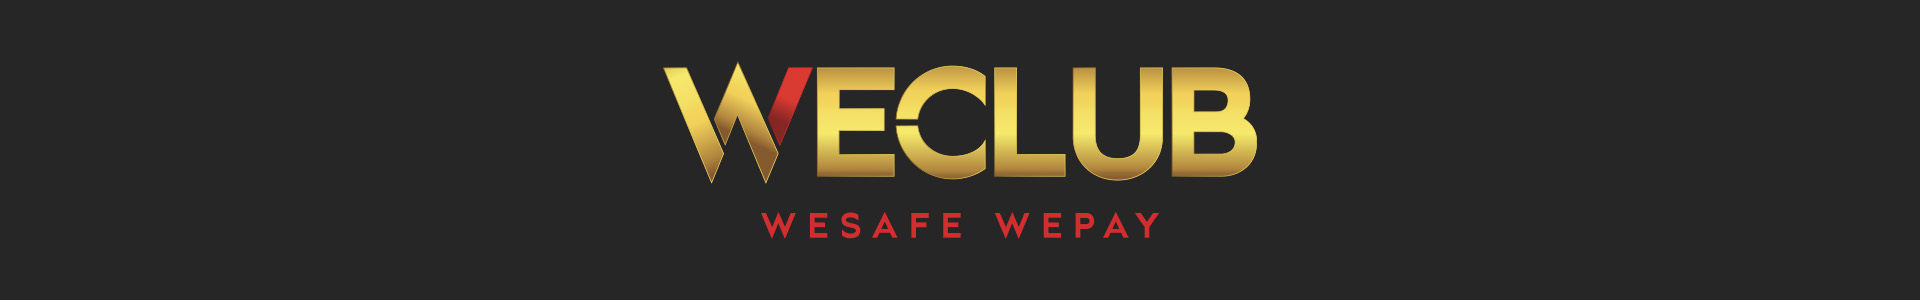 Weclub we safe we pay